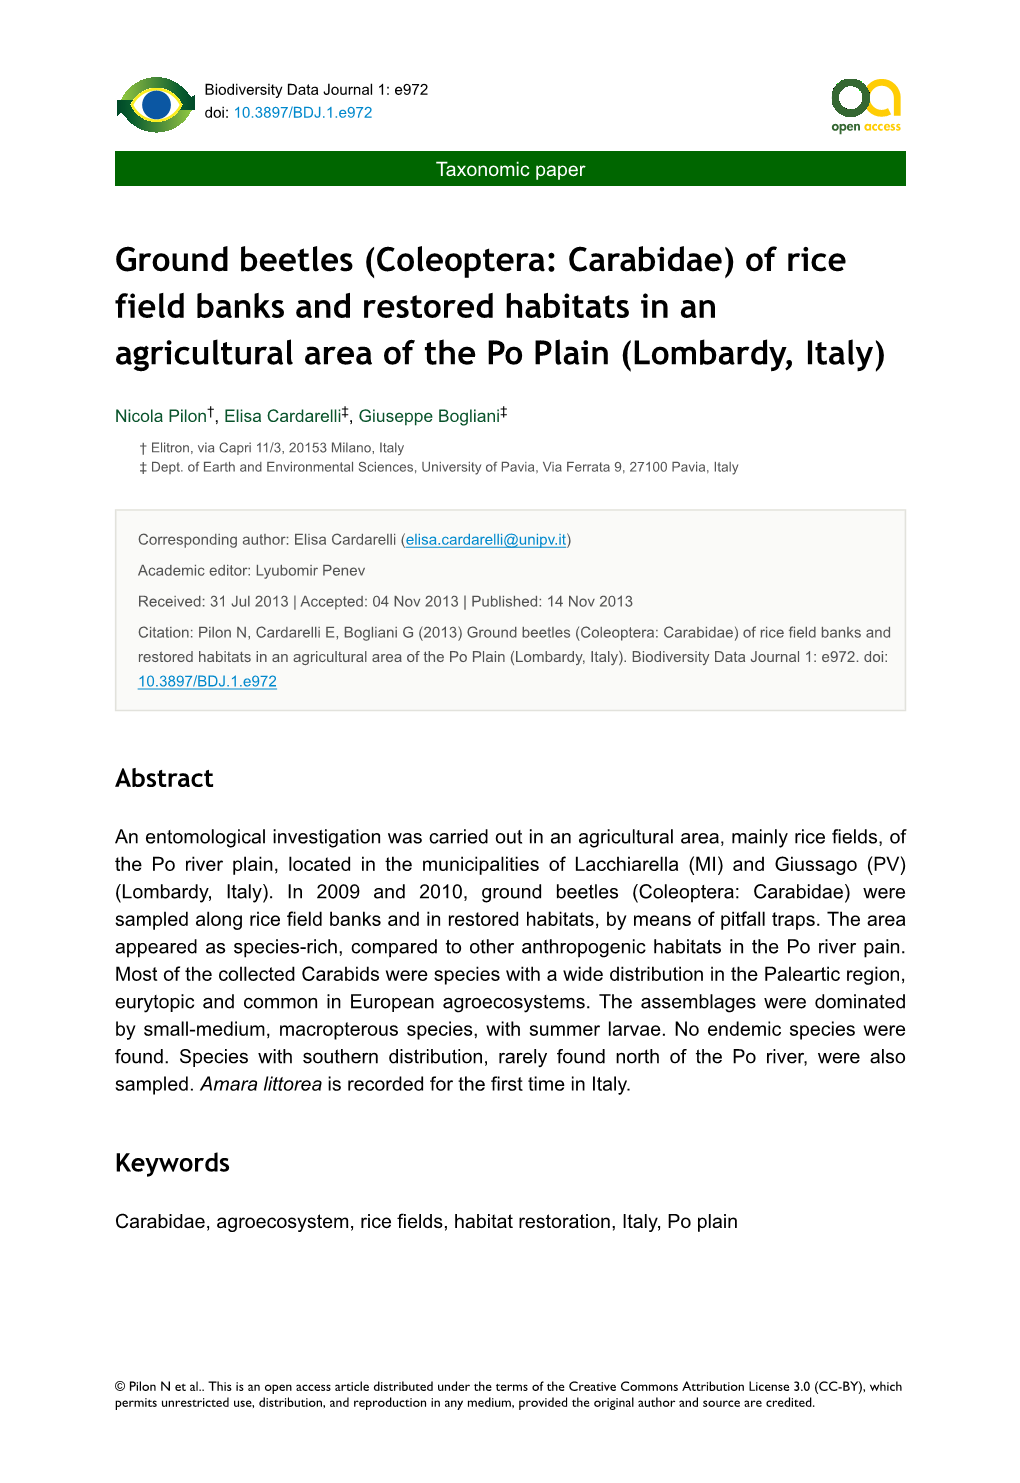 Ground Beetles (Coleoptera: Carabidae) of Rice Field Banks and Restored Habitats in an Agricultural Area of the Po Plain (Lombardy, Italy)